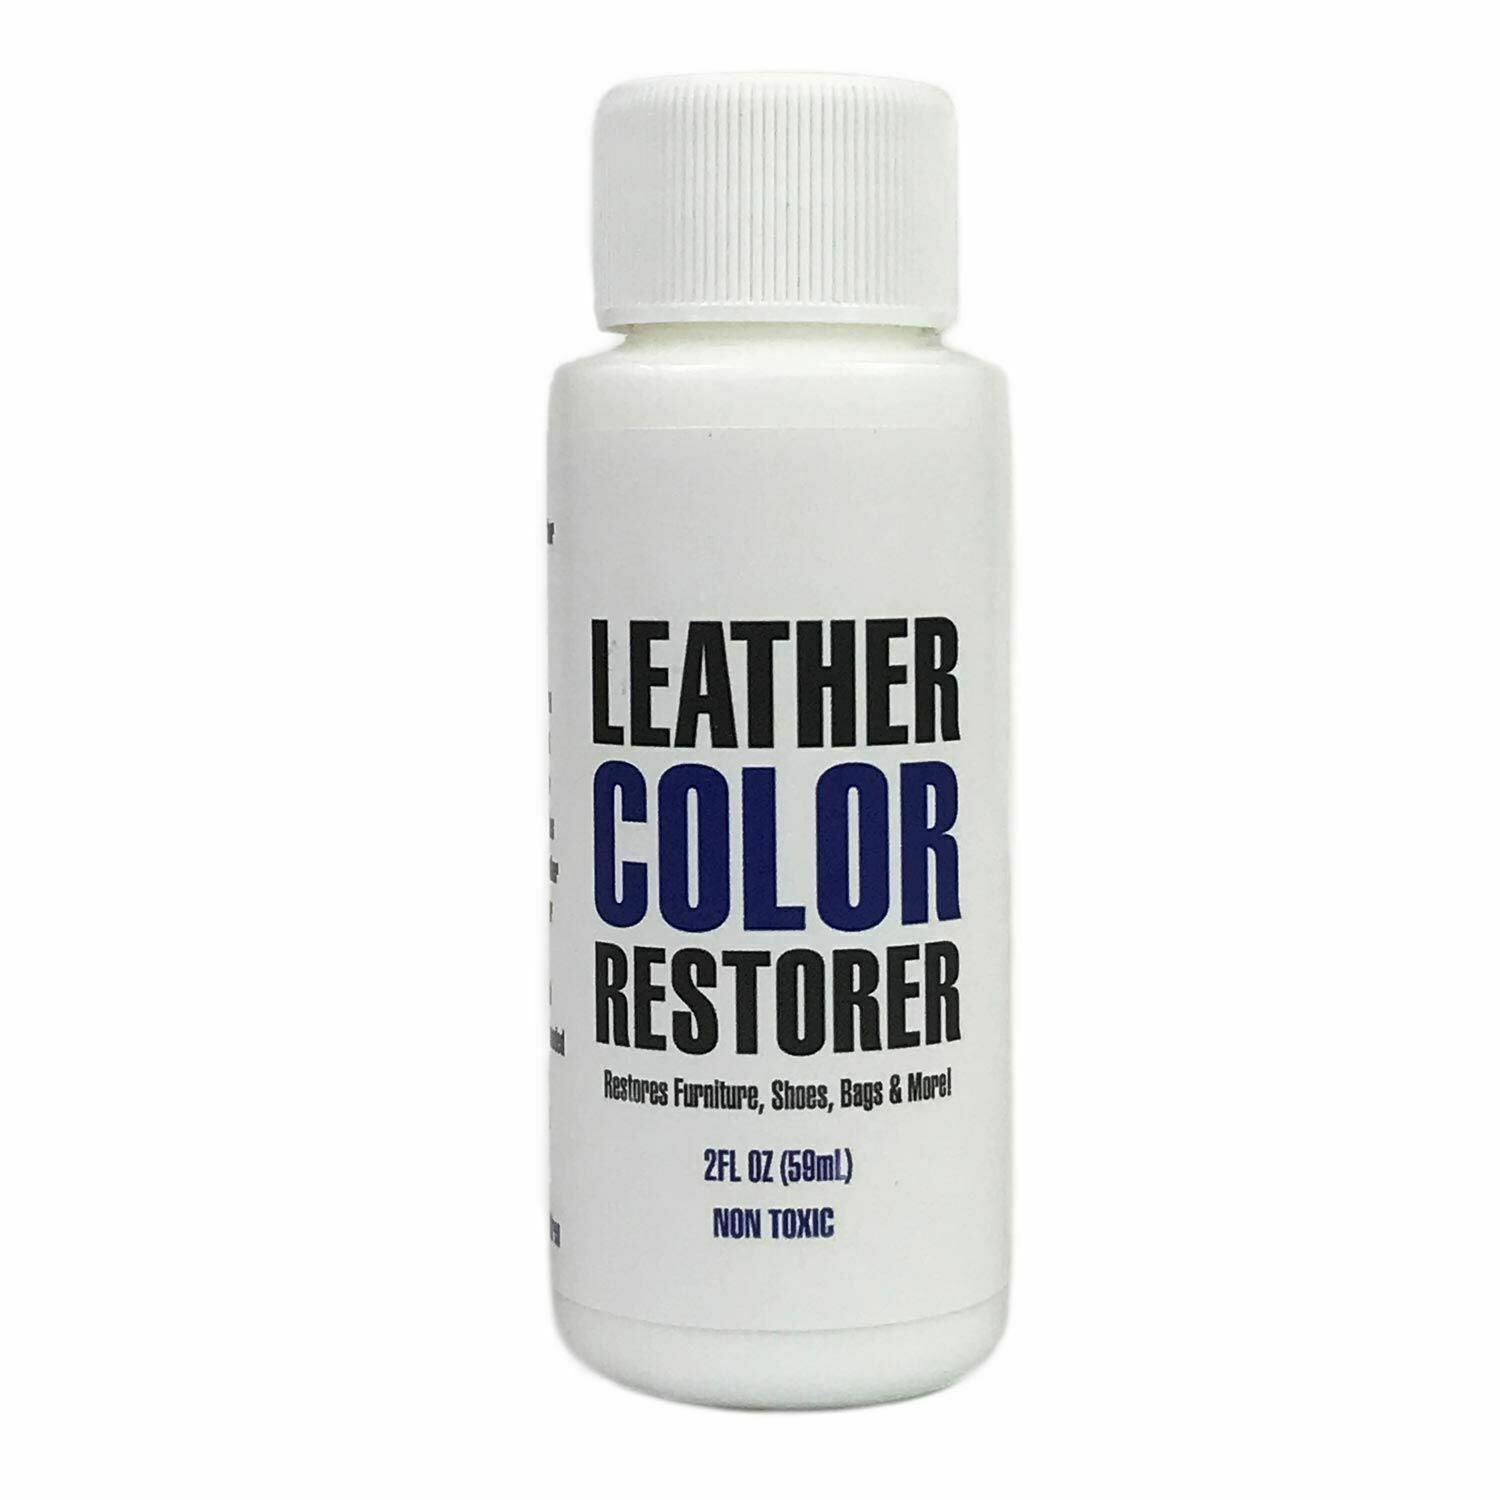 Leather Color Restorer & Refinish Repair Touch Up Leather Dye Leather Hero 2oz, Tan by My Shoe Supplies